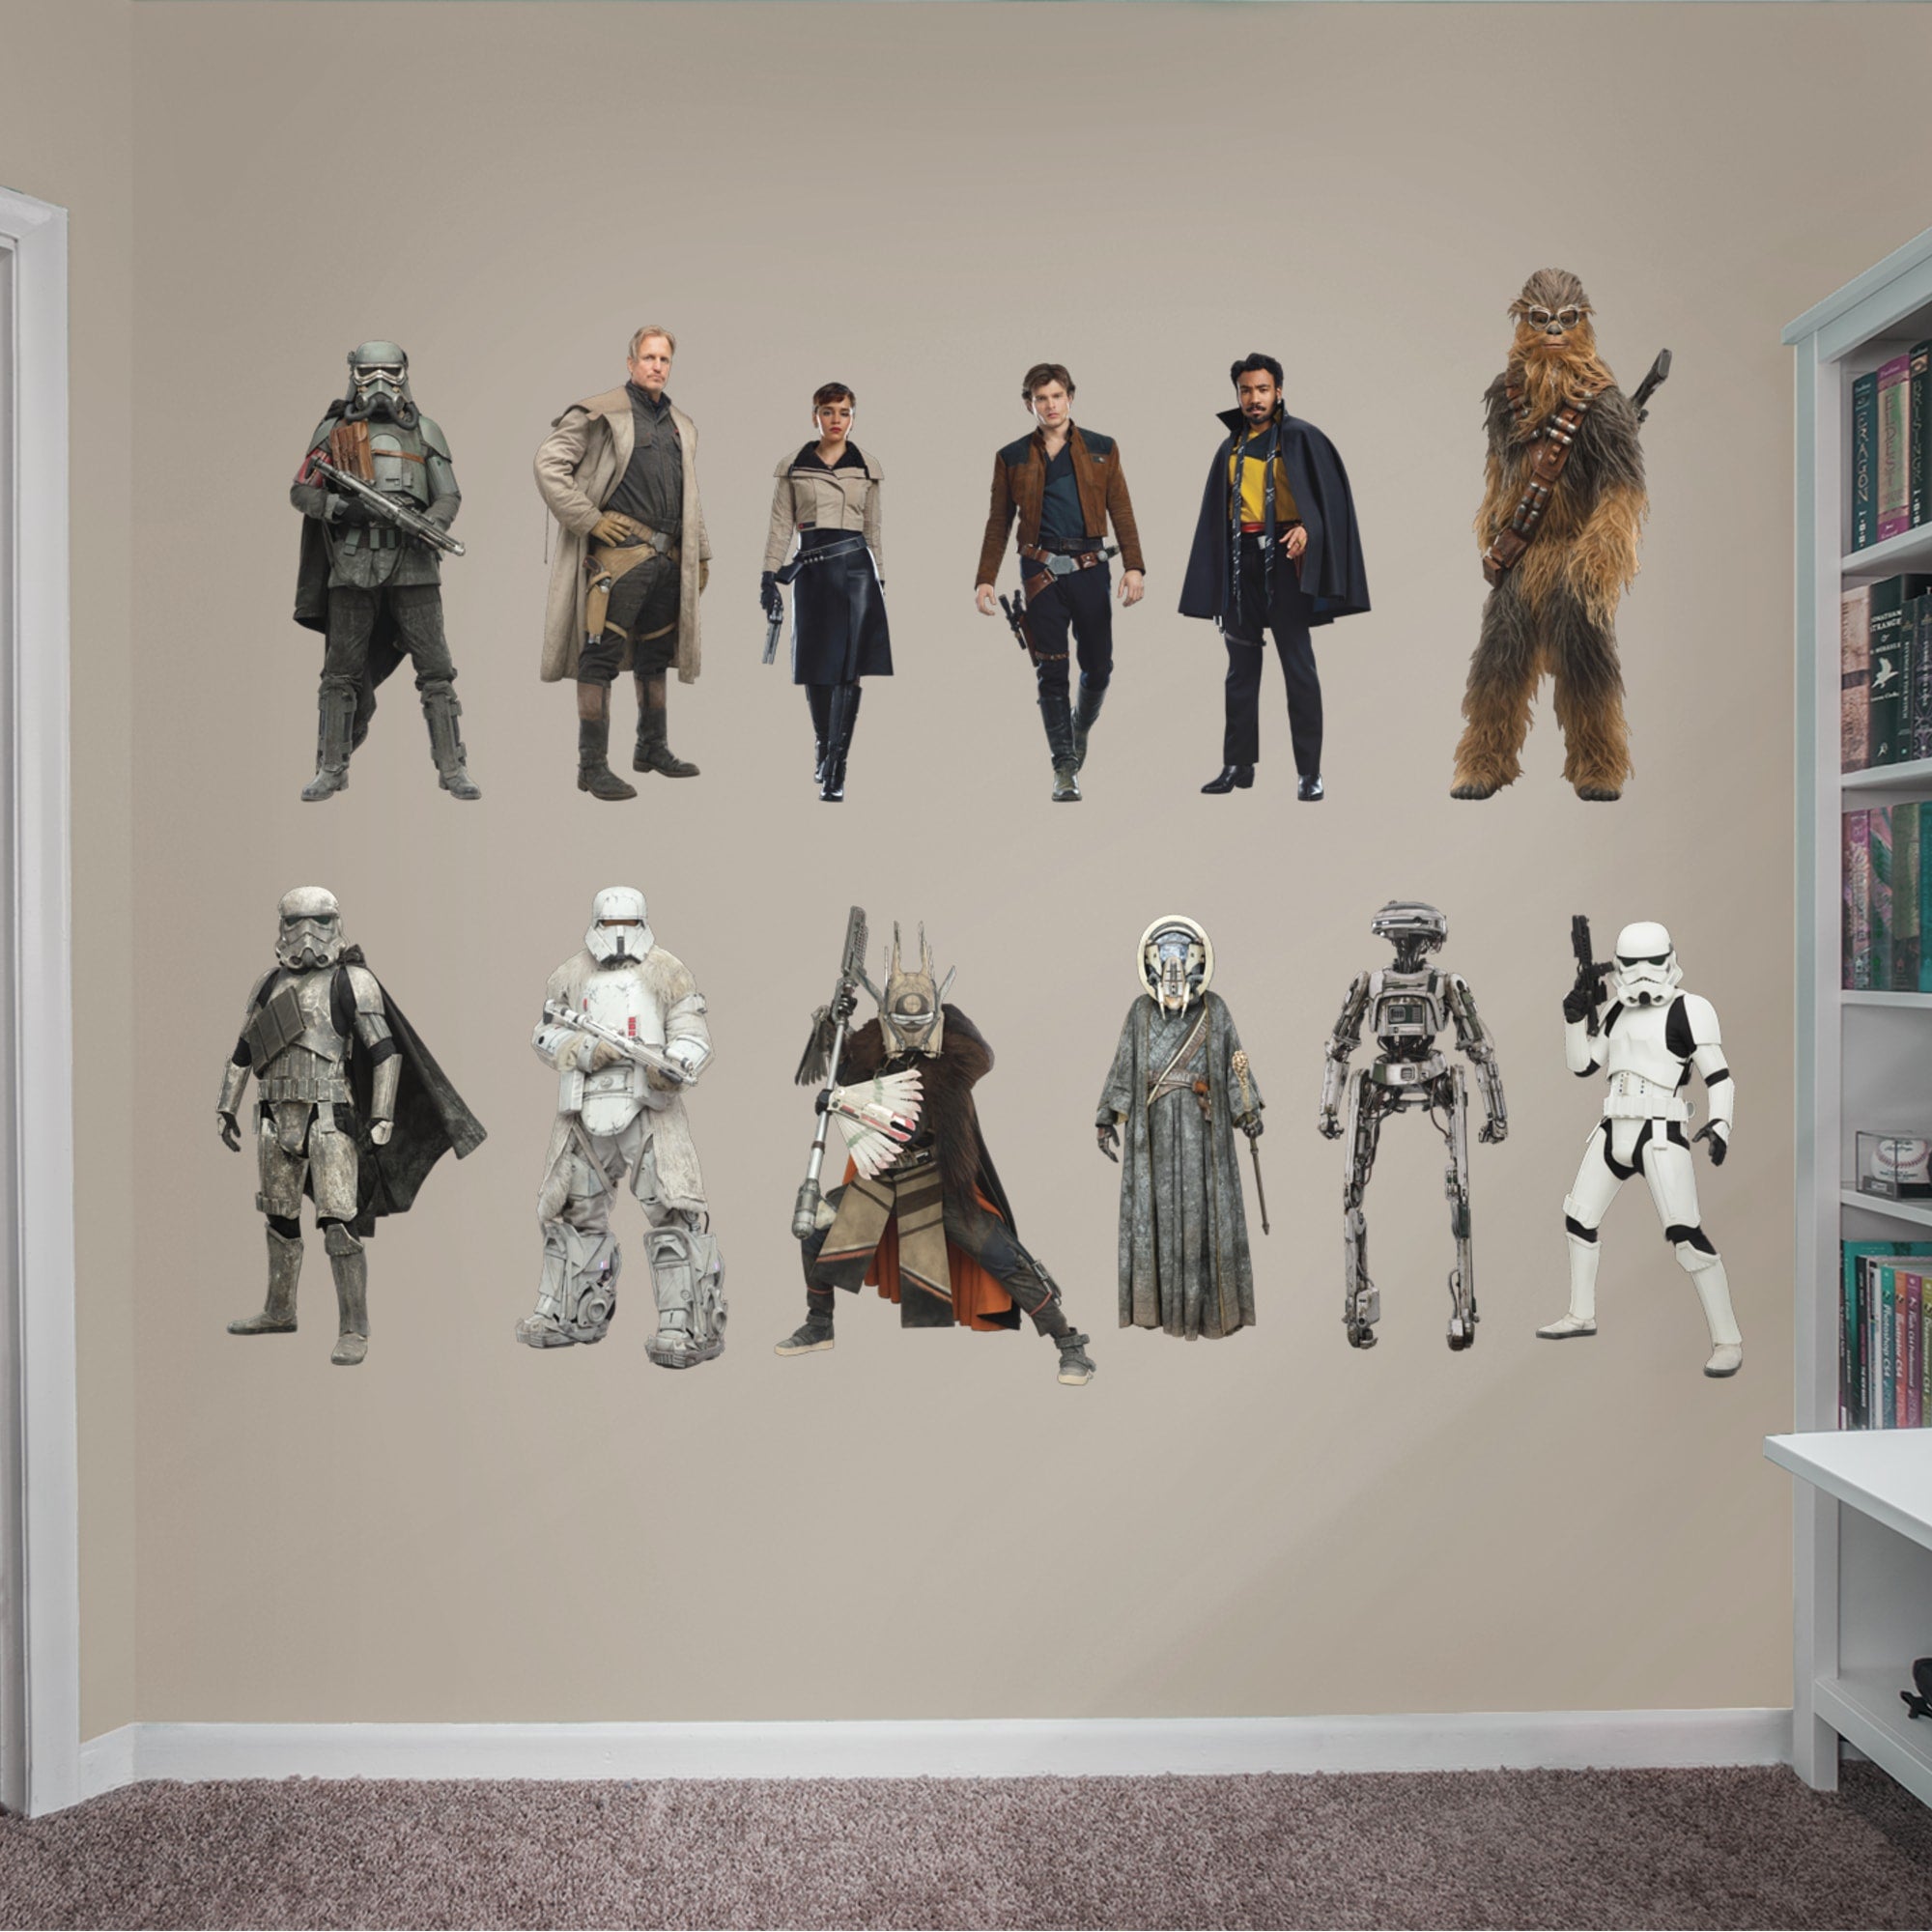 Solo: A Star Wars Story Collection - Officially Licensed Removable Wall Decals 12.0"W x 26.0"H by Fathead | Vinyl